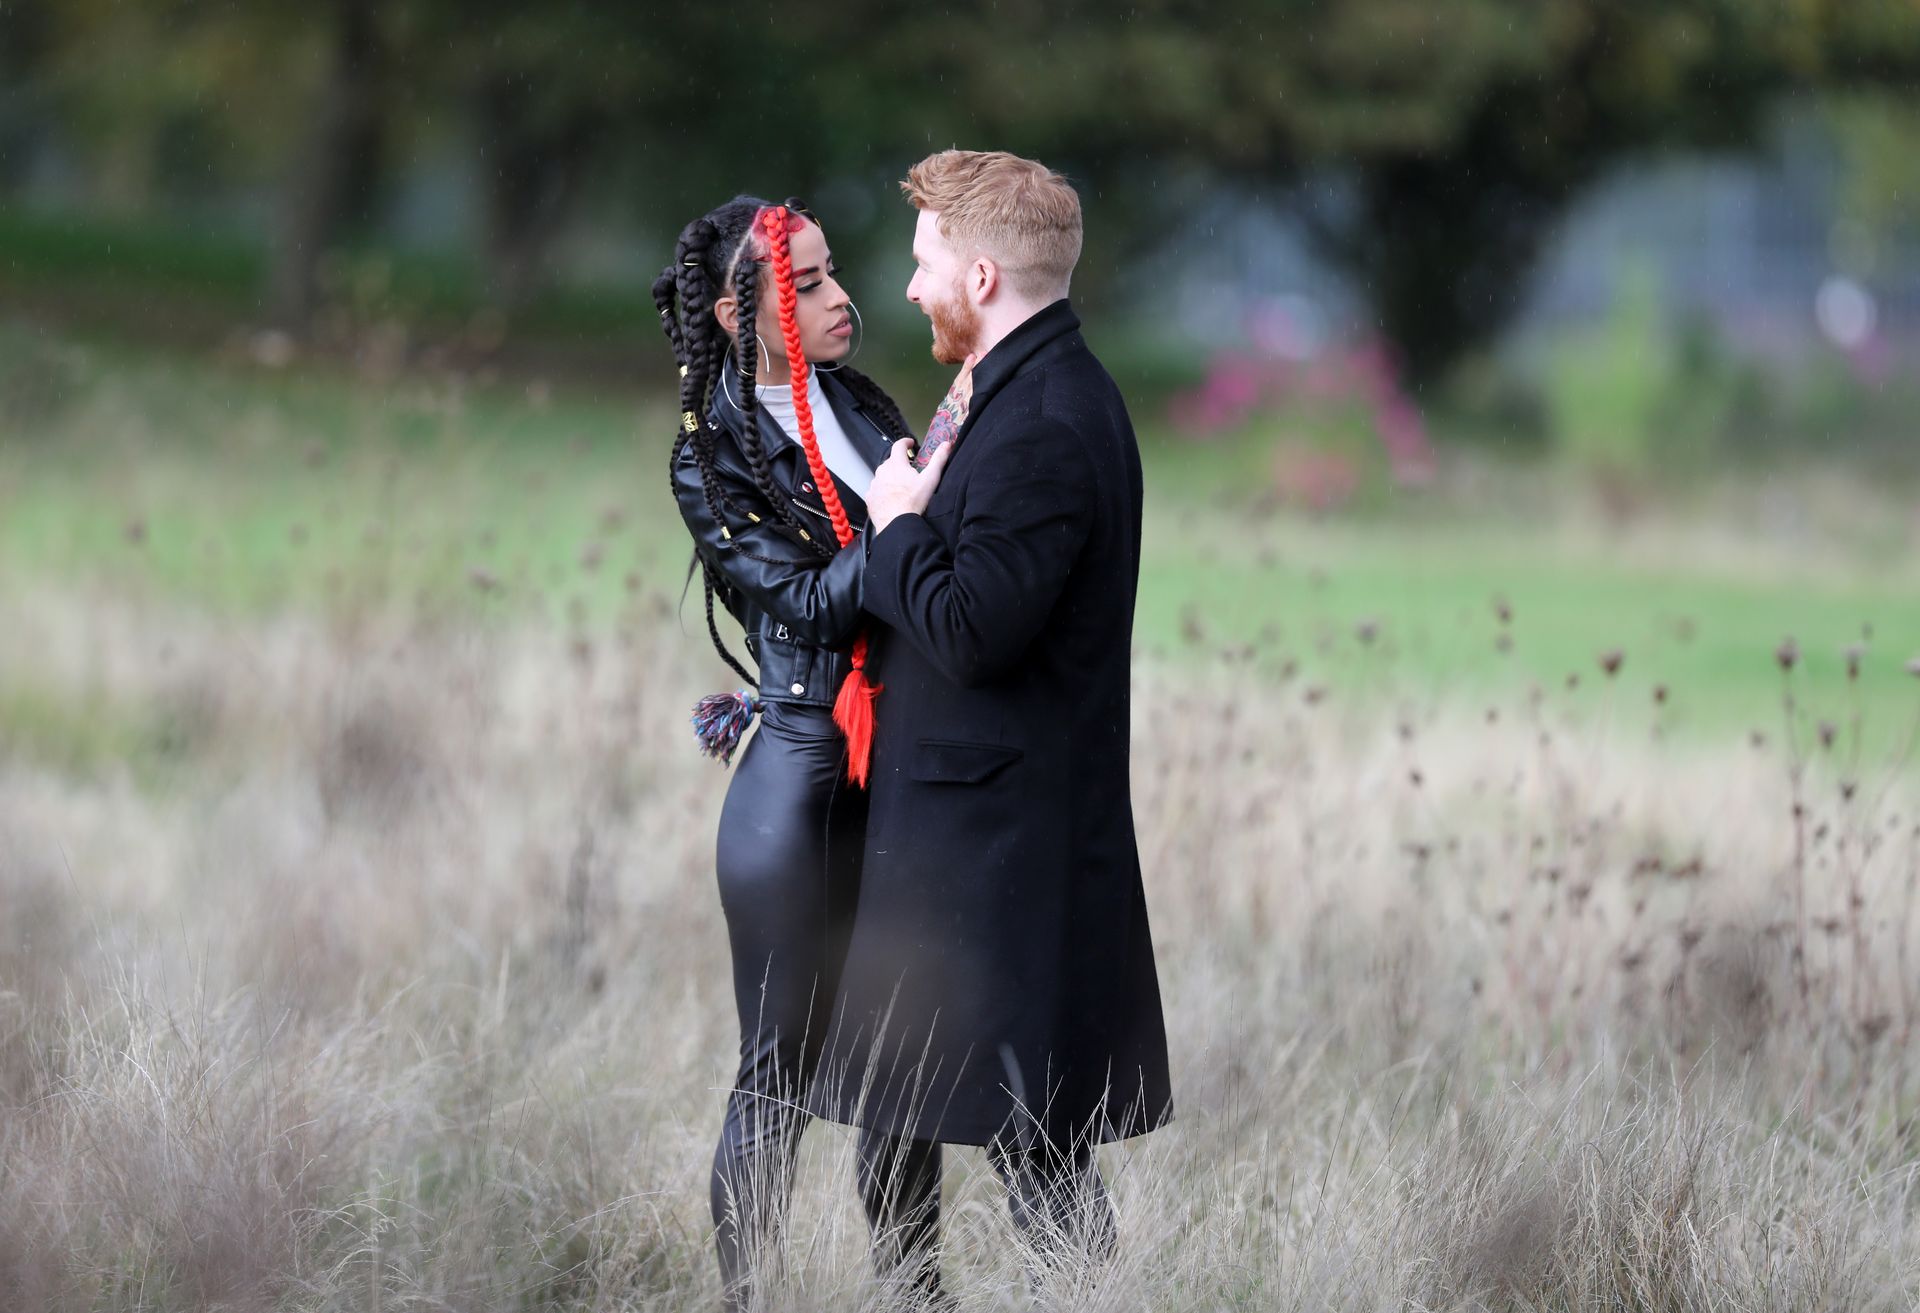 Neil Jones & Luisa Eusse are Seen Together in London (25 Photos)